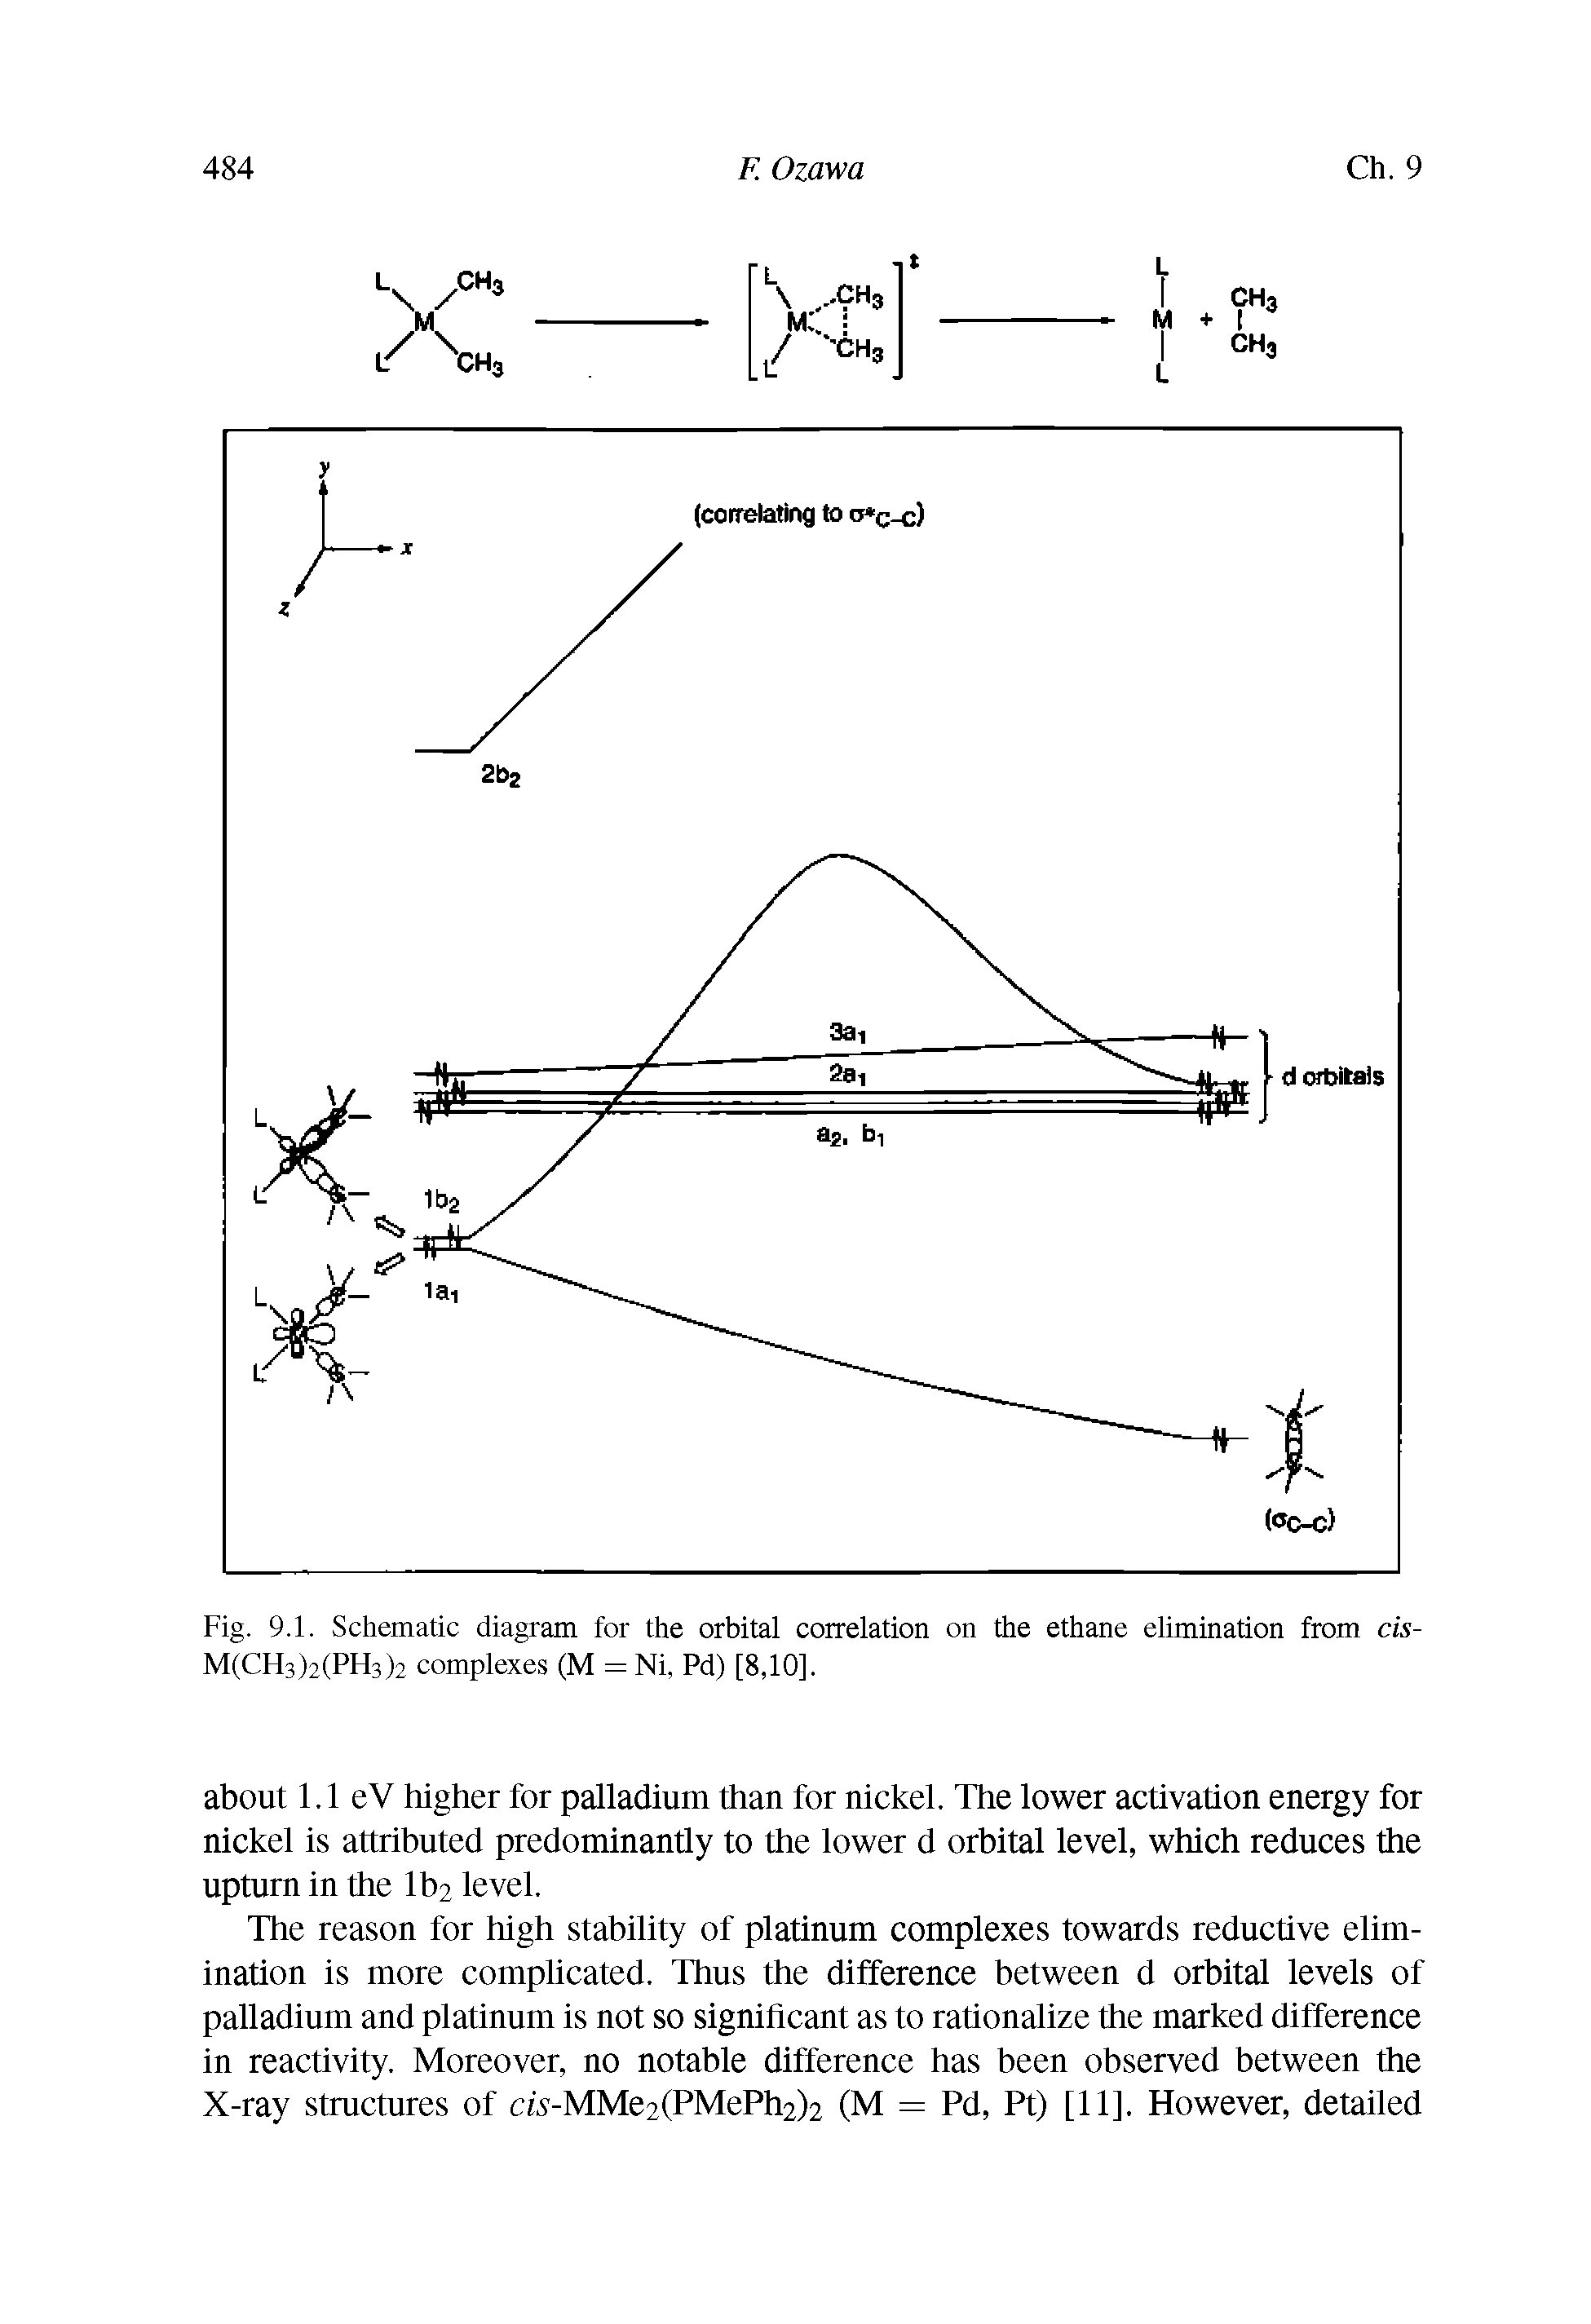 Fig. 9.1. Schematic diagram for the orbital correlation on the ethane elimination from cis-M(CH3)2(PH3)2 complexes (M = Ni, Pd) [8,10].